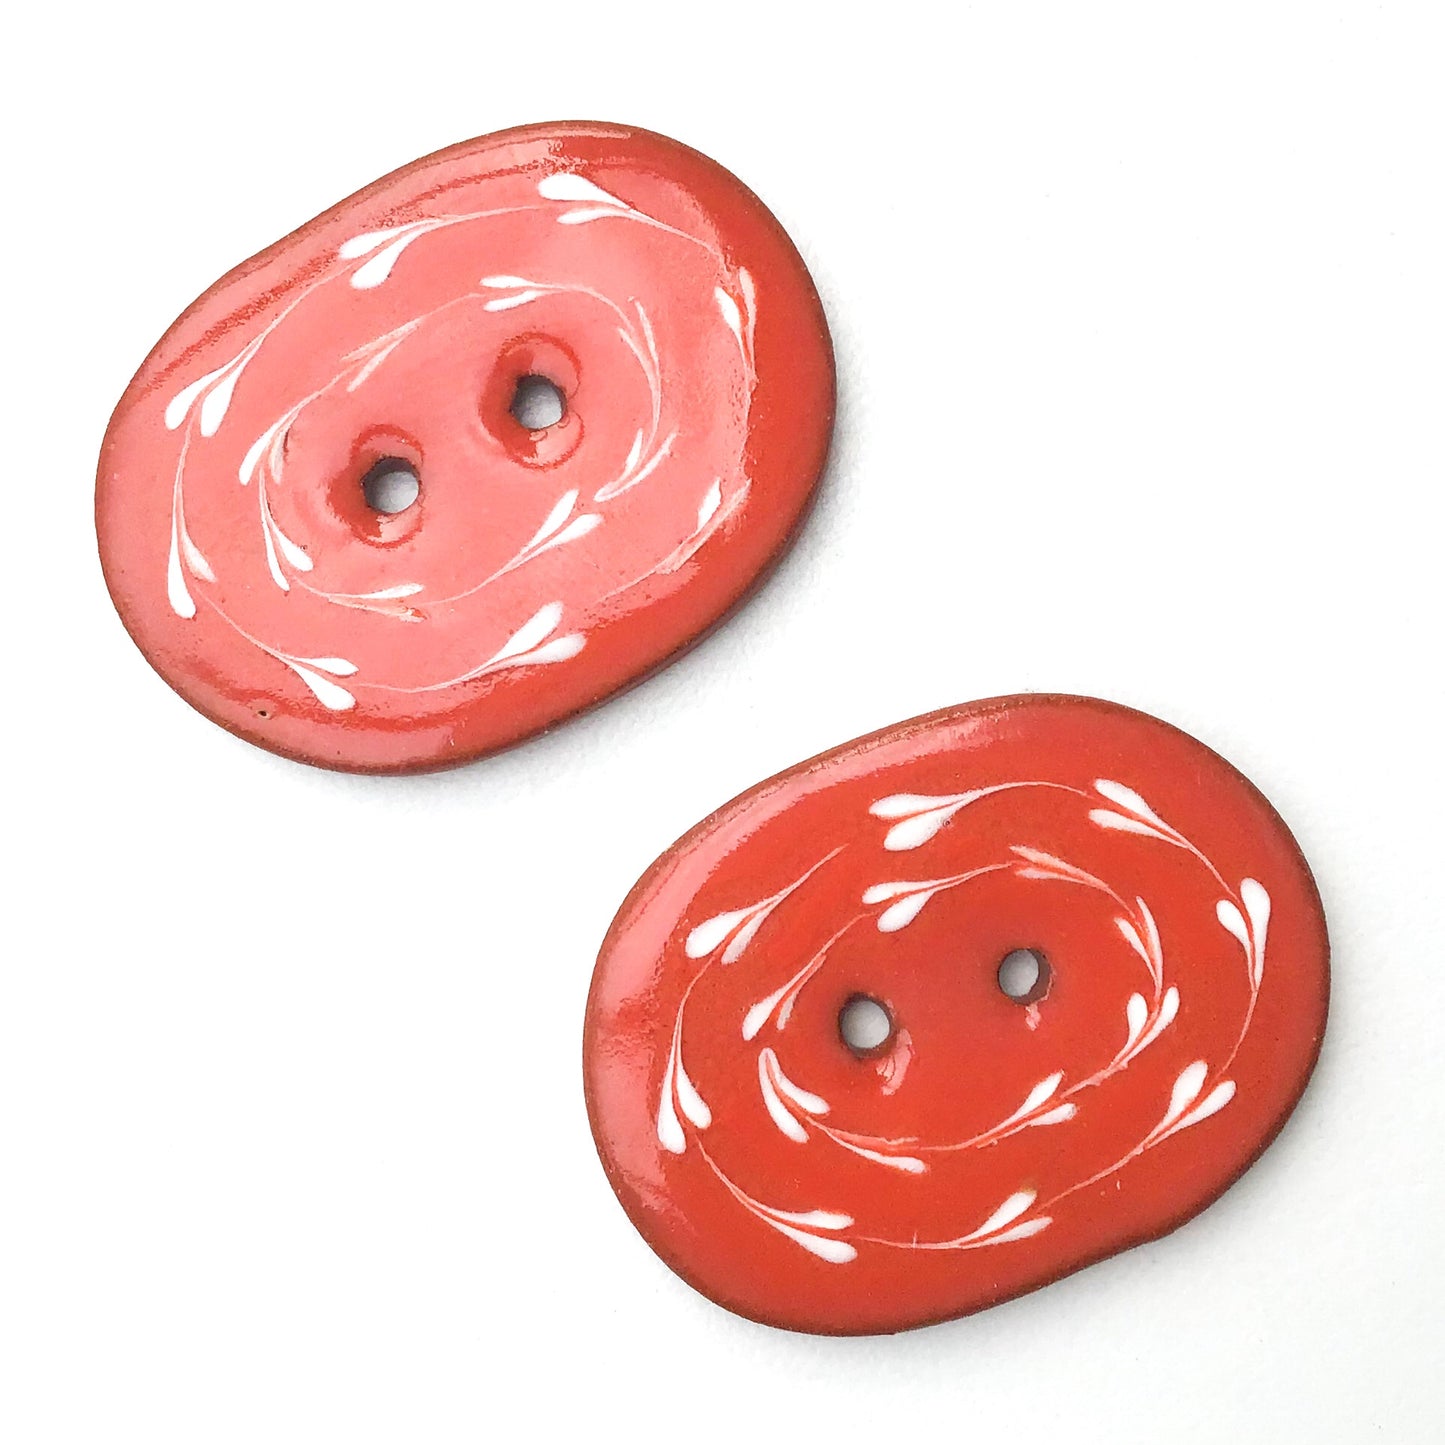 Red-Orange & White Ceramic Buttons - Oval Clay Buttons - 1" x 1 1/4"